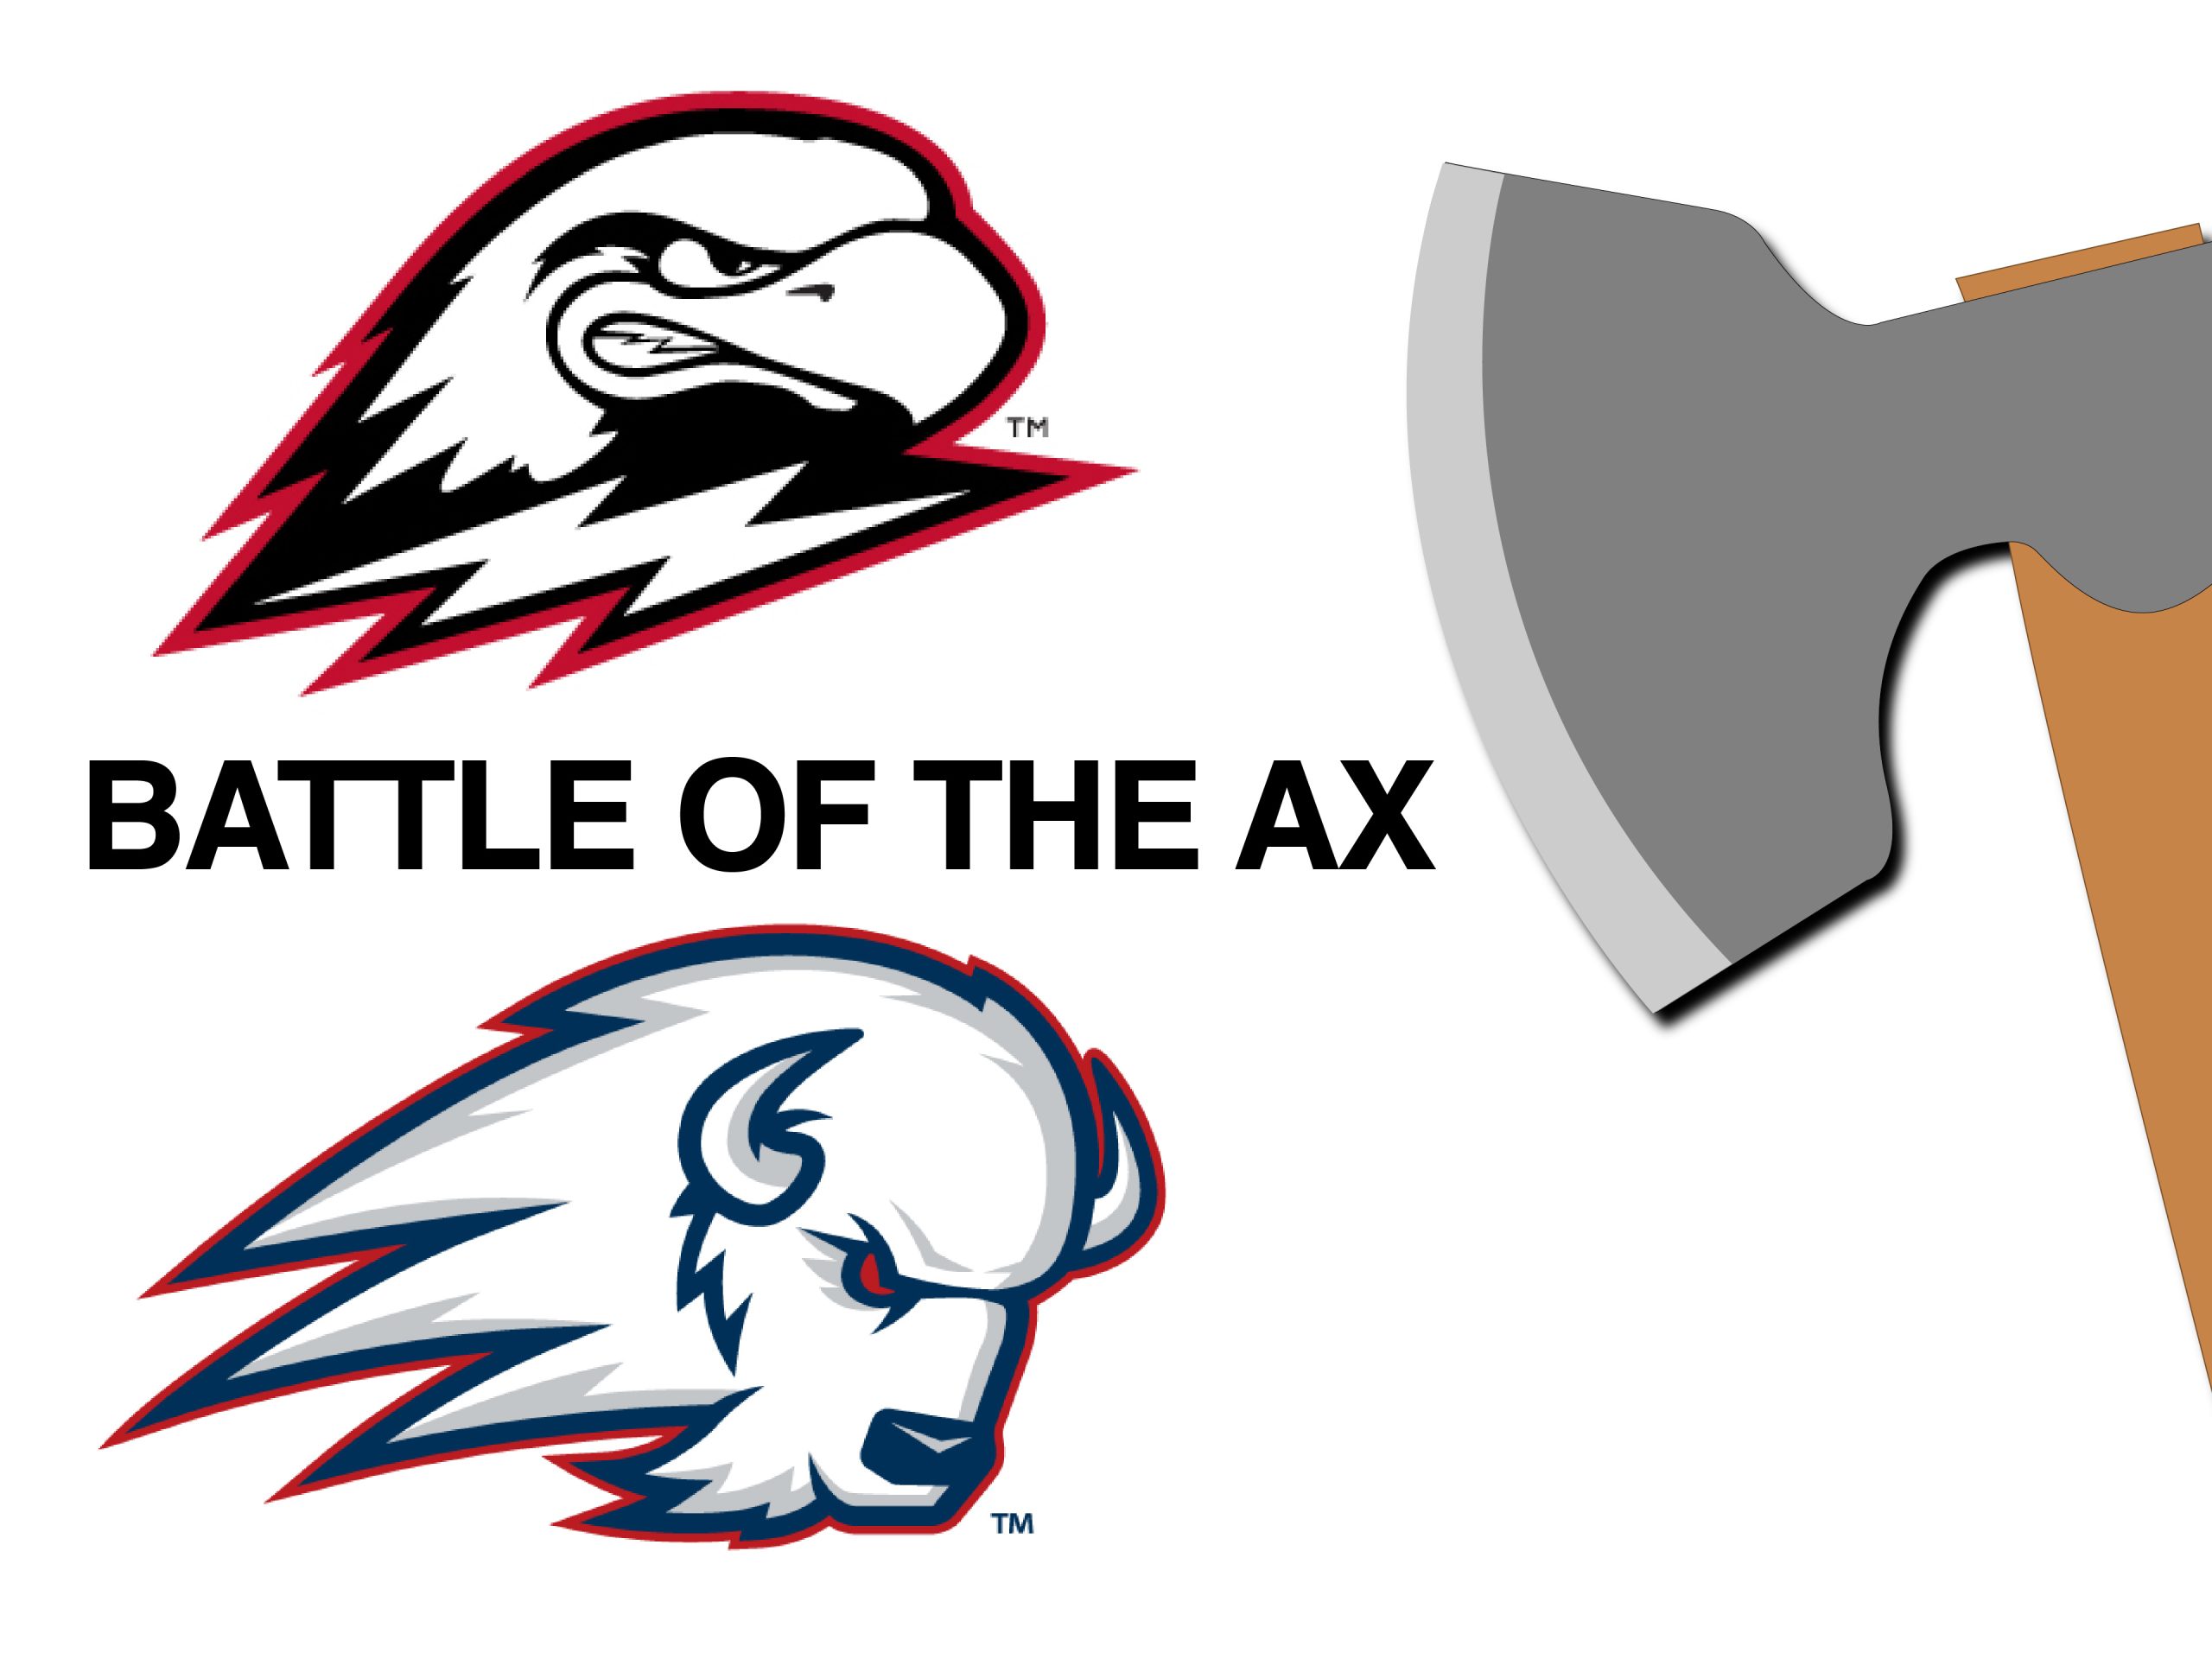 The Battle of the Ax is revived after 60 years